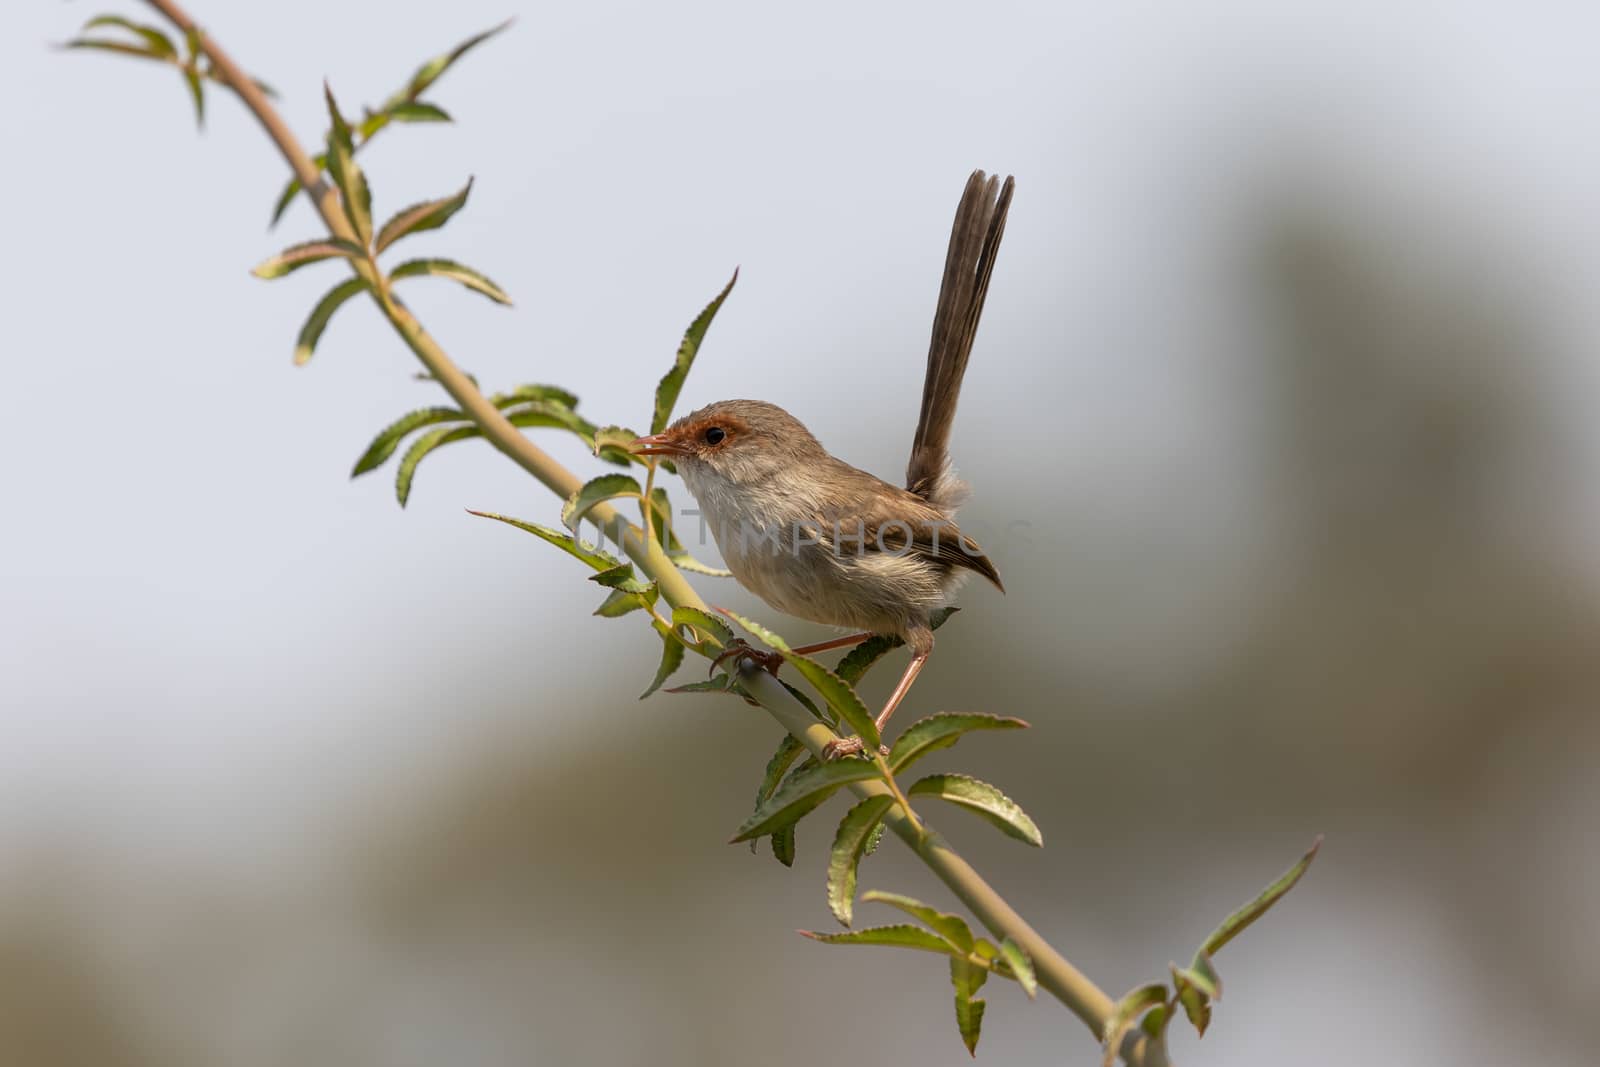 A female Superb Fairy-Wren sitting on a green branch in Australia by WittkePhotos